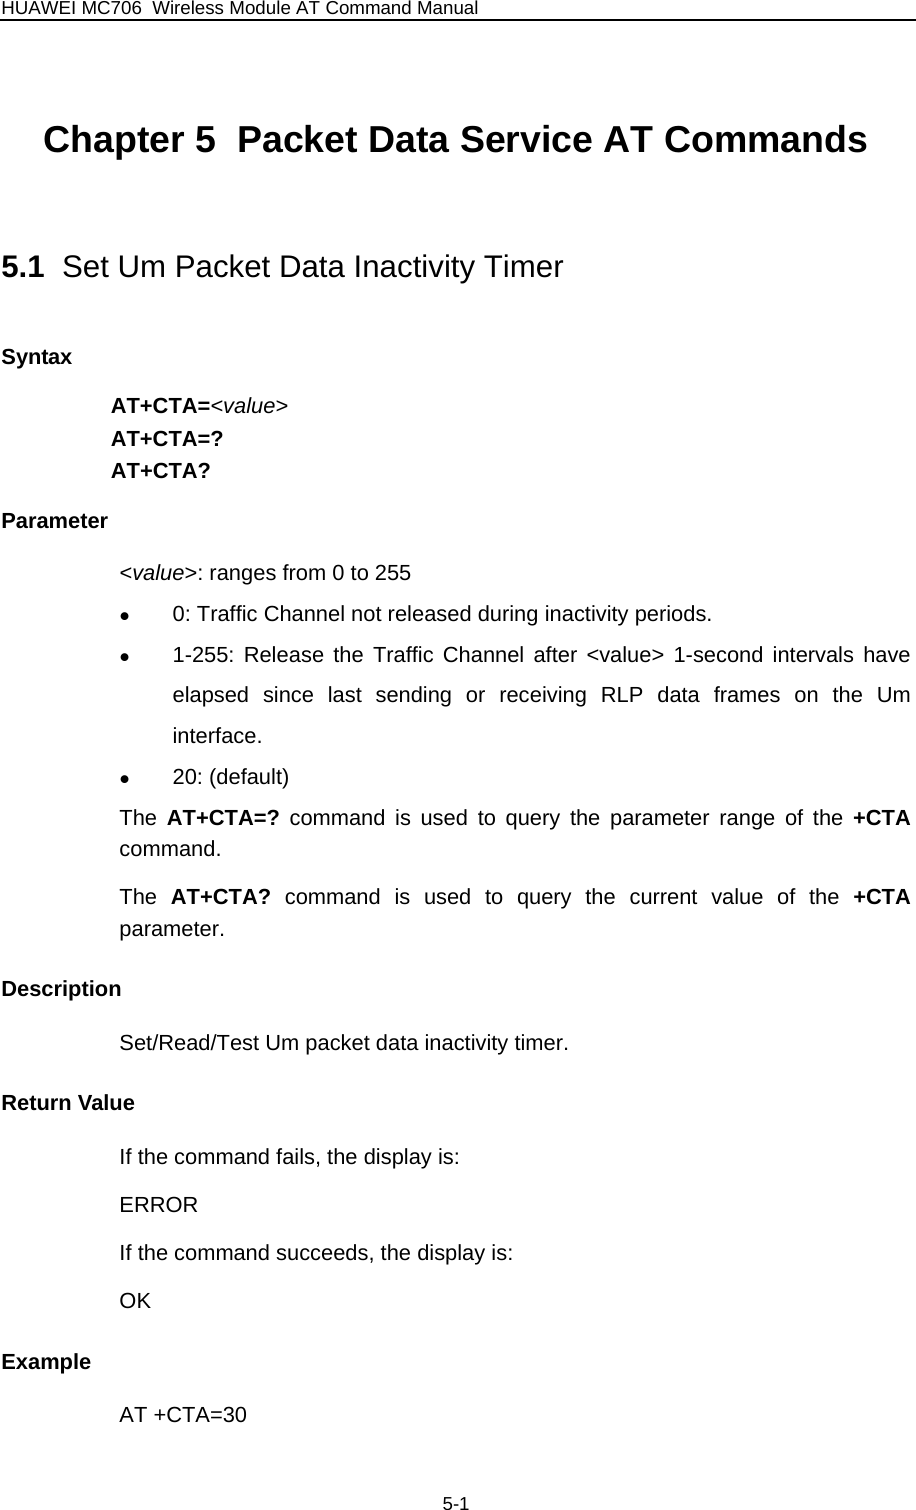 HUAWEI MC706 Wireless Module AT Command Manual Chapter 5  Packet Data Service AT Commands 5.1  Set Um Packet Data Inactivity Timer Syntax AT+CTA=&lt;value&gt; AT+CTA=? AT+CTA? Parameter &lt;value&gt;: ranges from 0 to 255 z 0: Traffic Channel not released during inactivity periods. z 1-255: Release the Traffic Channel after &lt;value&gt; 1-second intervals have elapsed since last sending or receiving RLP data frames on the Um interface. z 20: (default) The  AT+CTA=?  command is used to query the parameter range of the +CTA command. The  AT+CTA?  command is used to query the current value of the +CTA parameter.  Description Set/Read/Test Um packet data inactivity timer. Return Value If the command fails, the display is: ERROR If the command succeeds, the display is: OK Example AT +CTA=30 5-1 